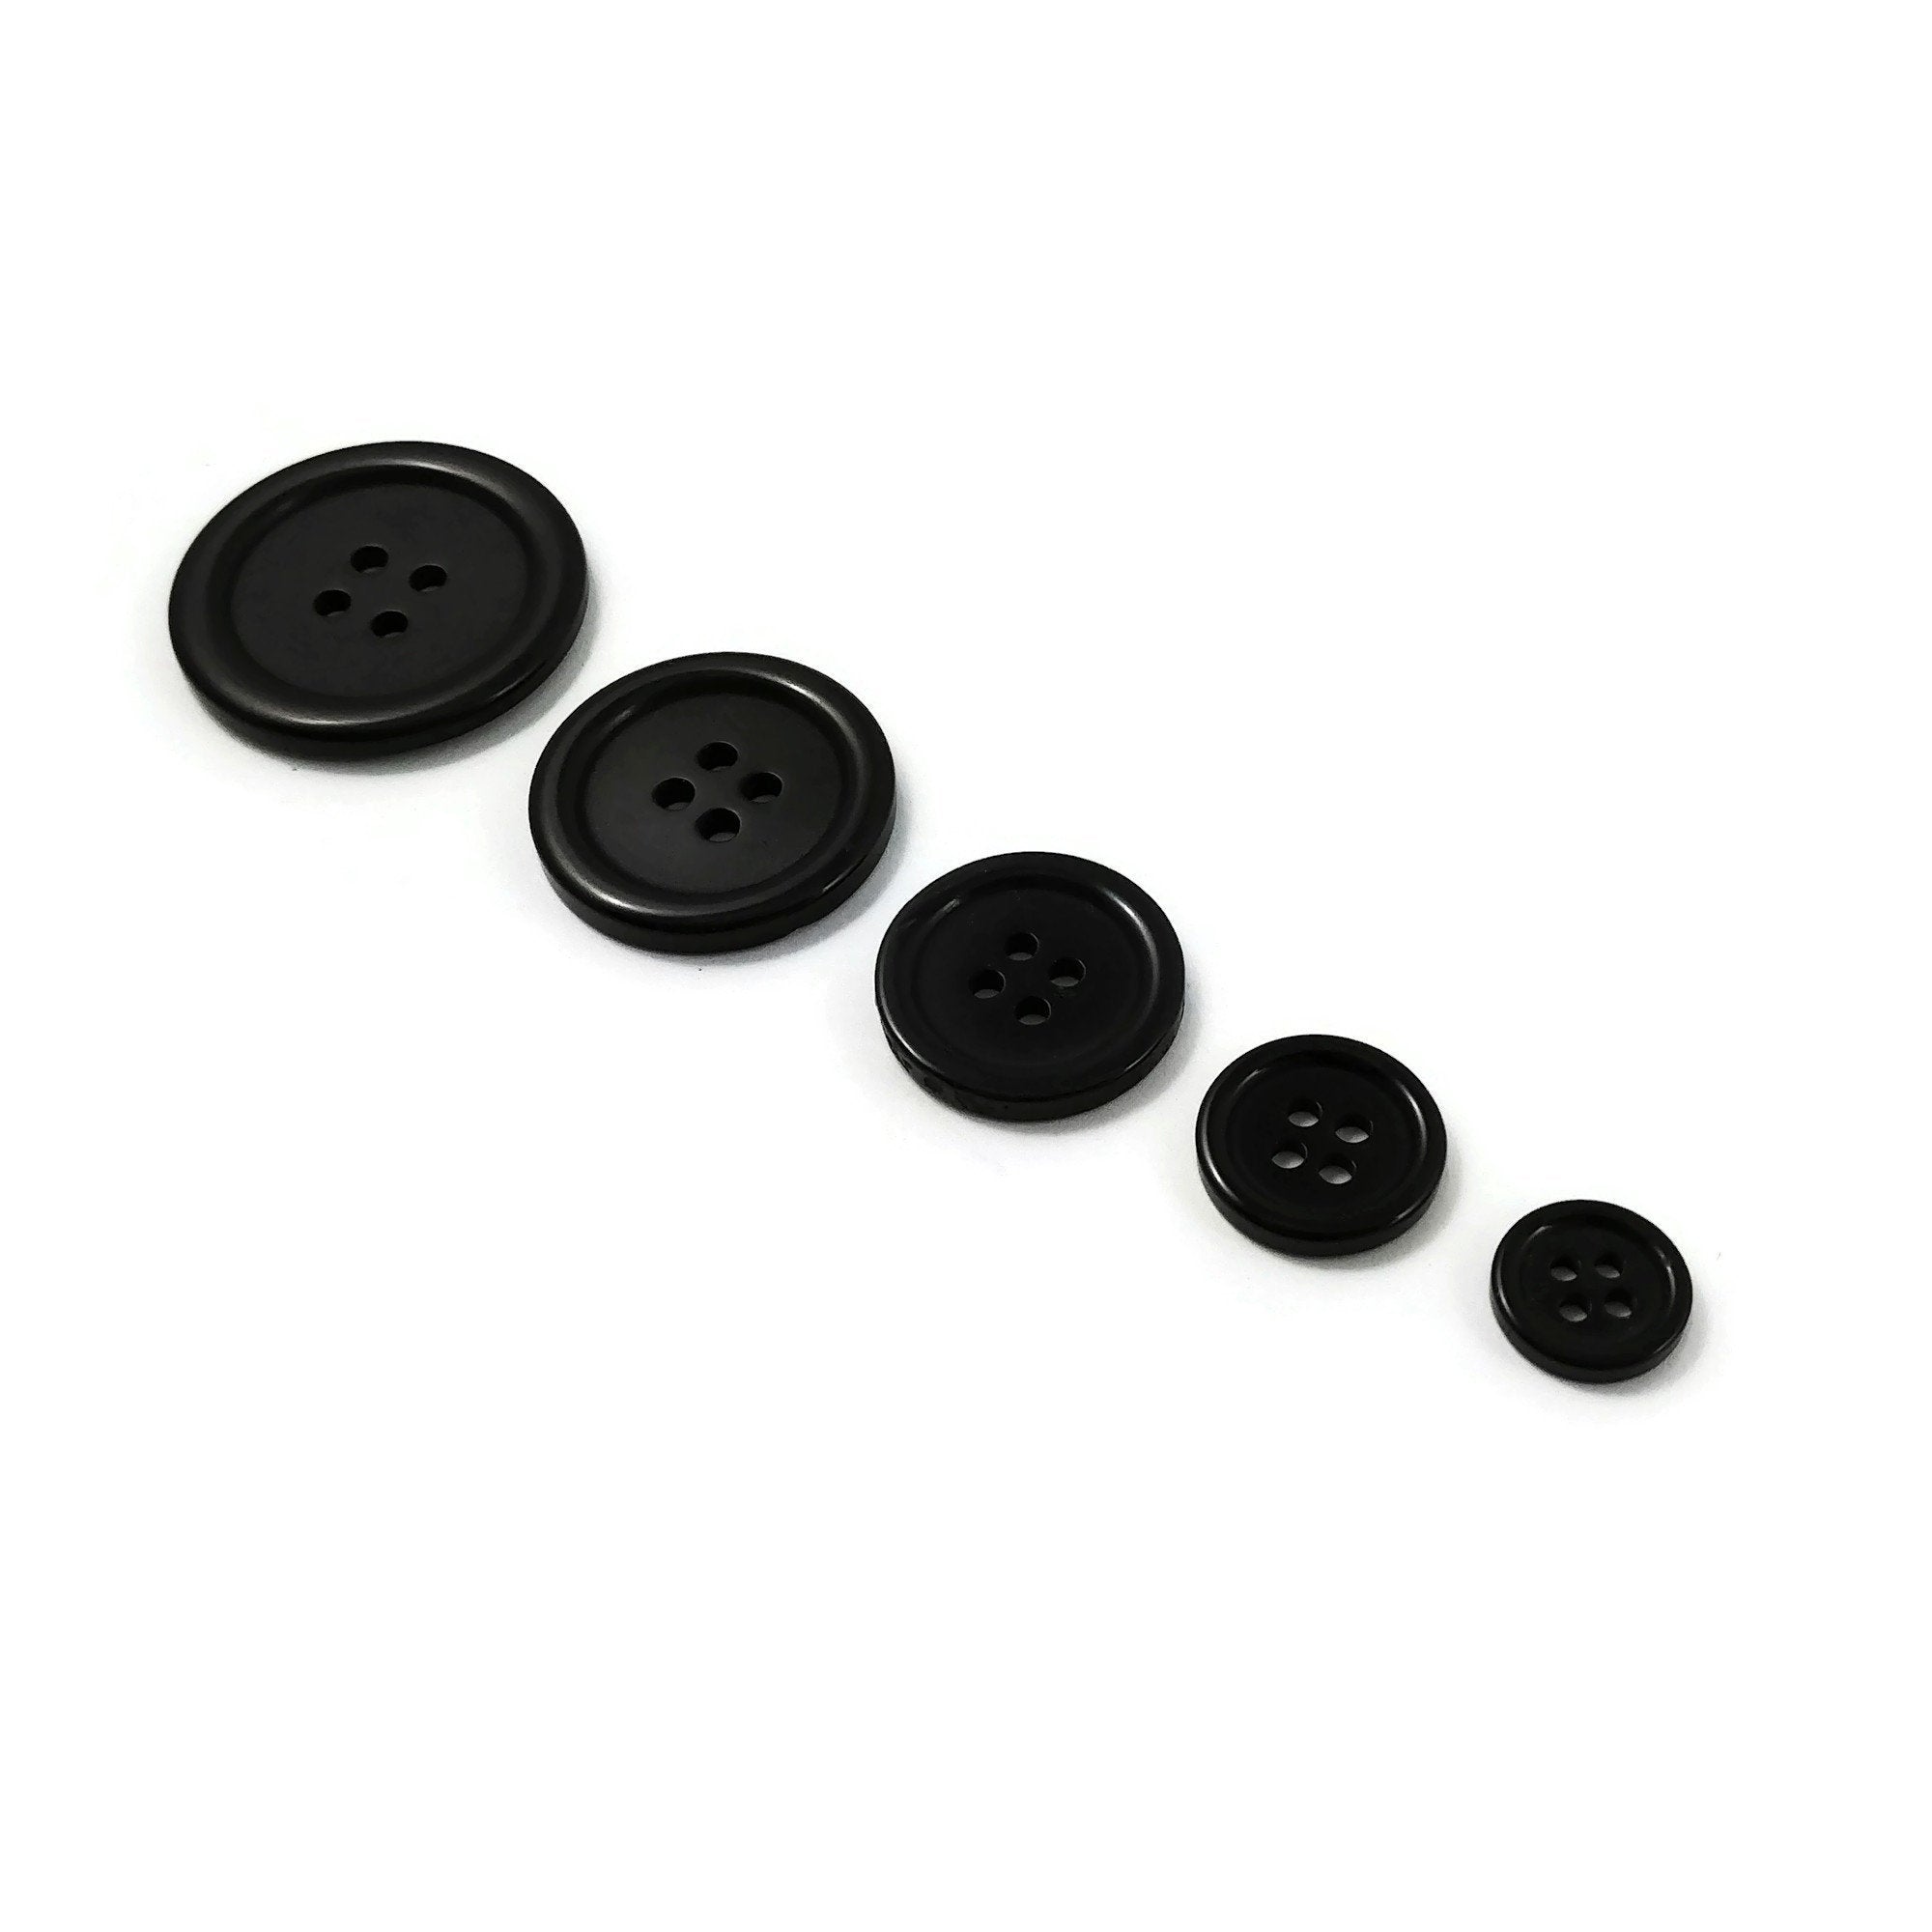 6 black resin sewing buttons - Pick your size: 11, 15, 20, 25 or 30mm